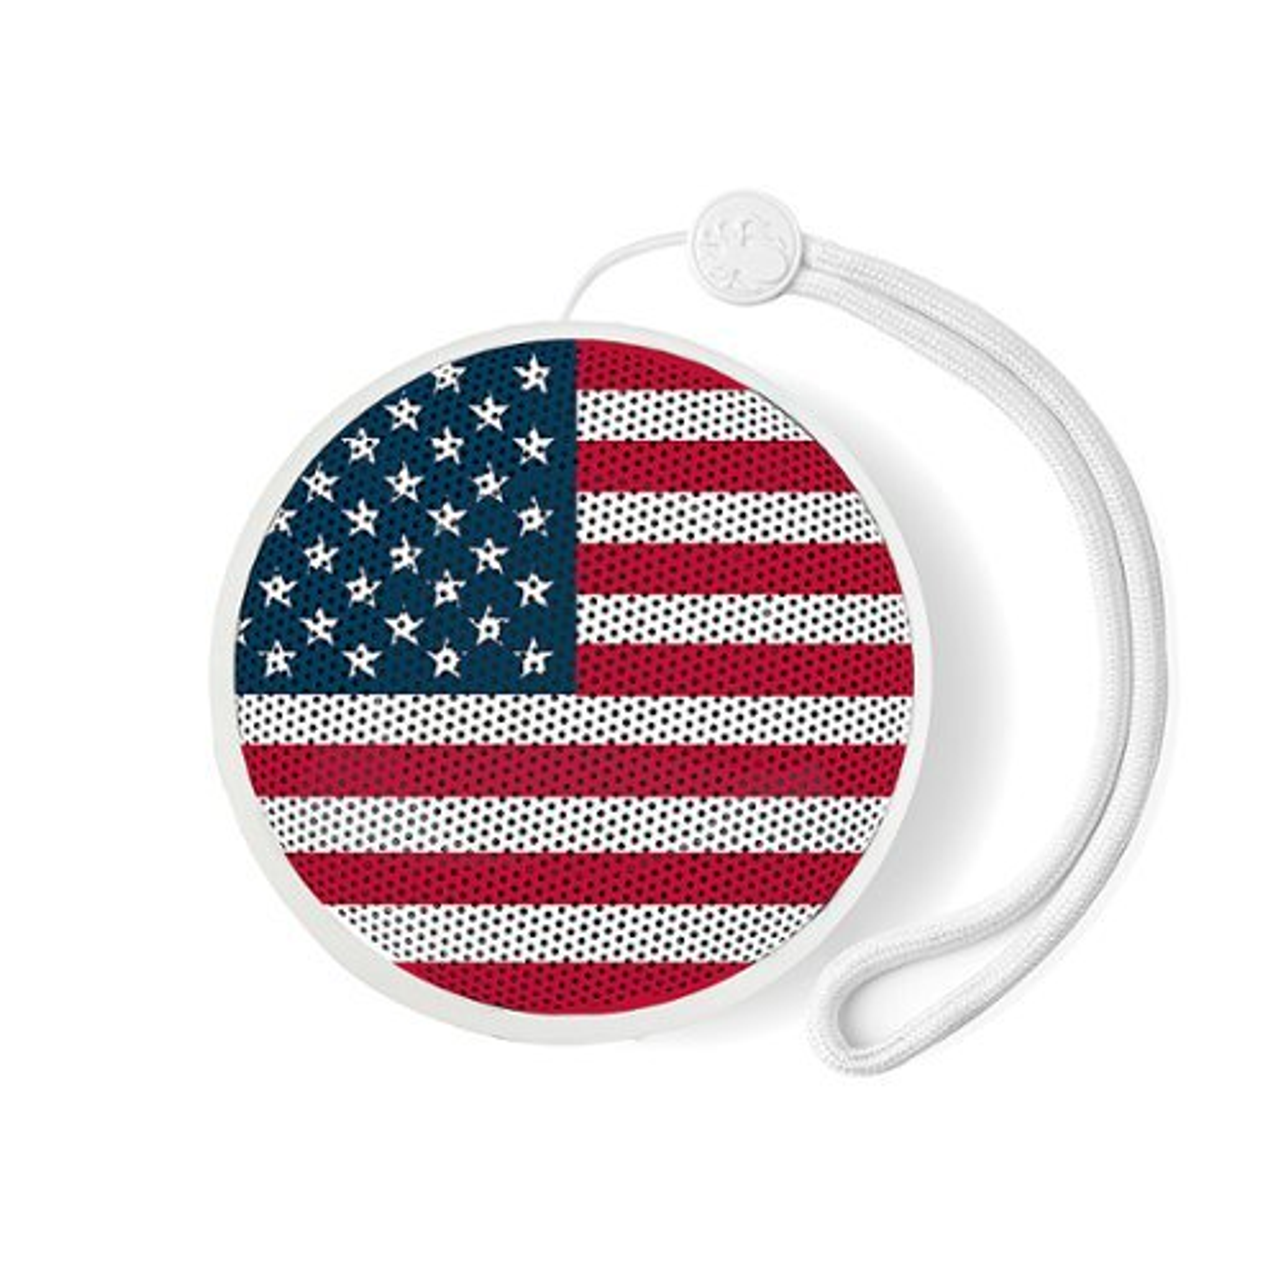 Speaqua - Cruiser H2.0 Portable Waterproof Compact Bluetooth Speaker with Bottle Opener - USA Flag